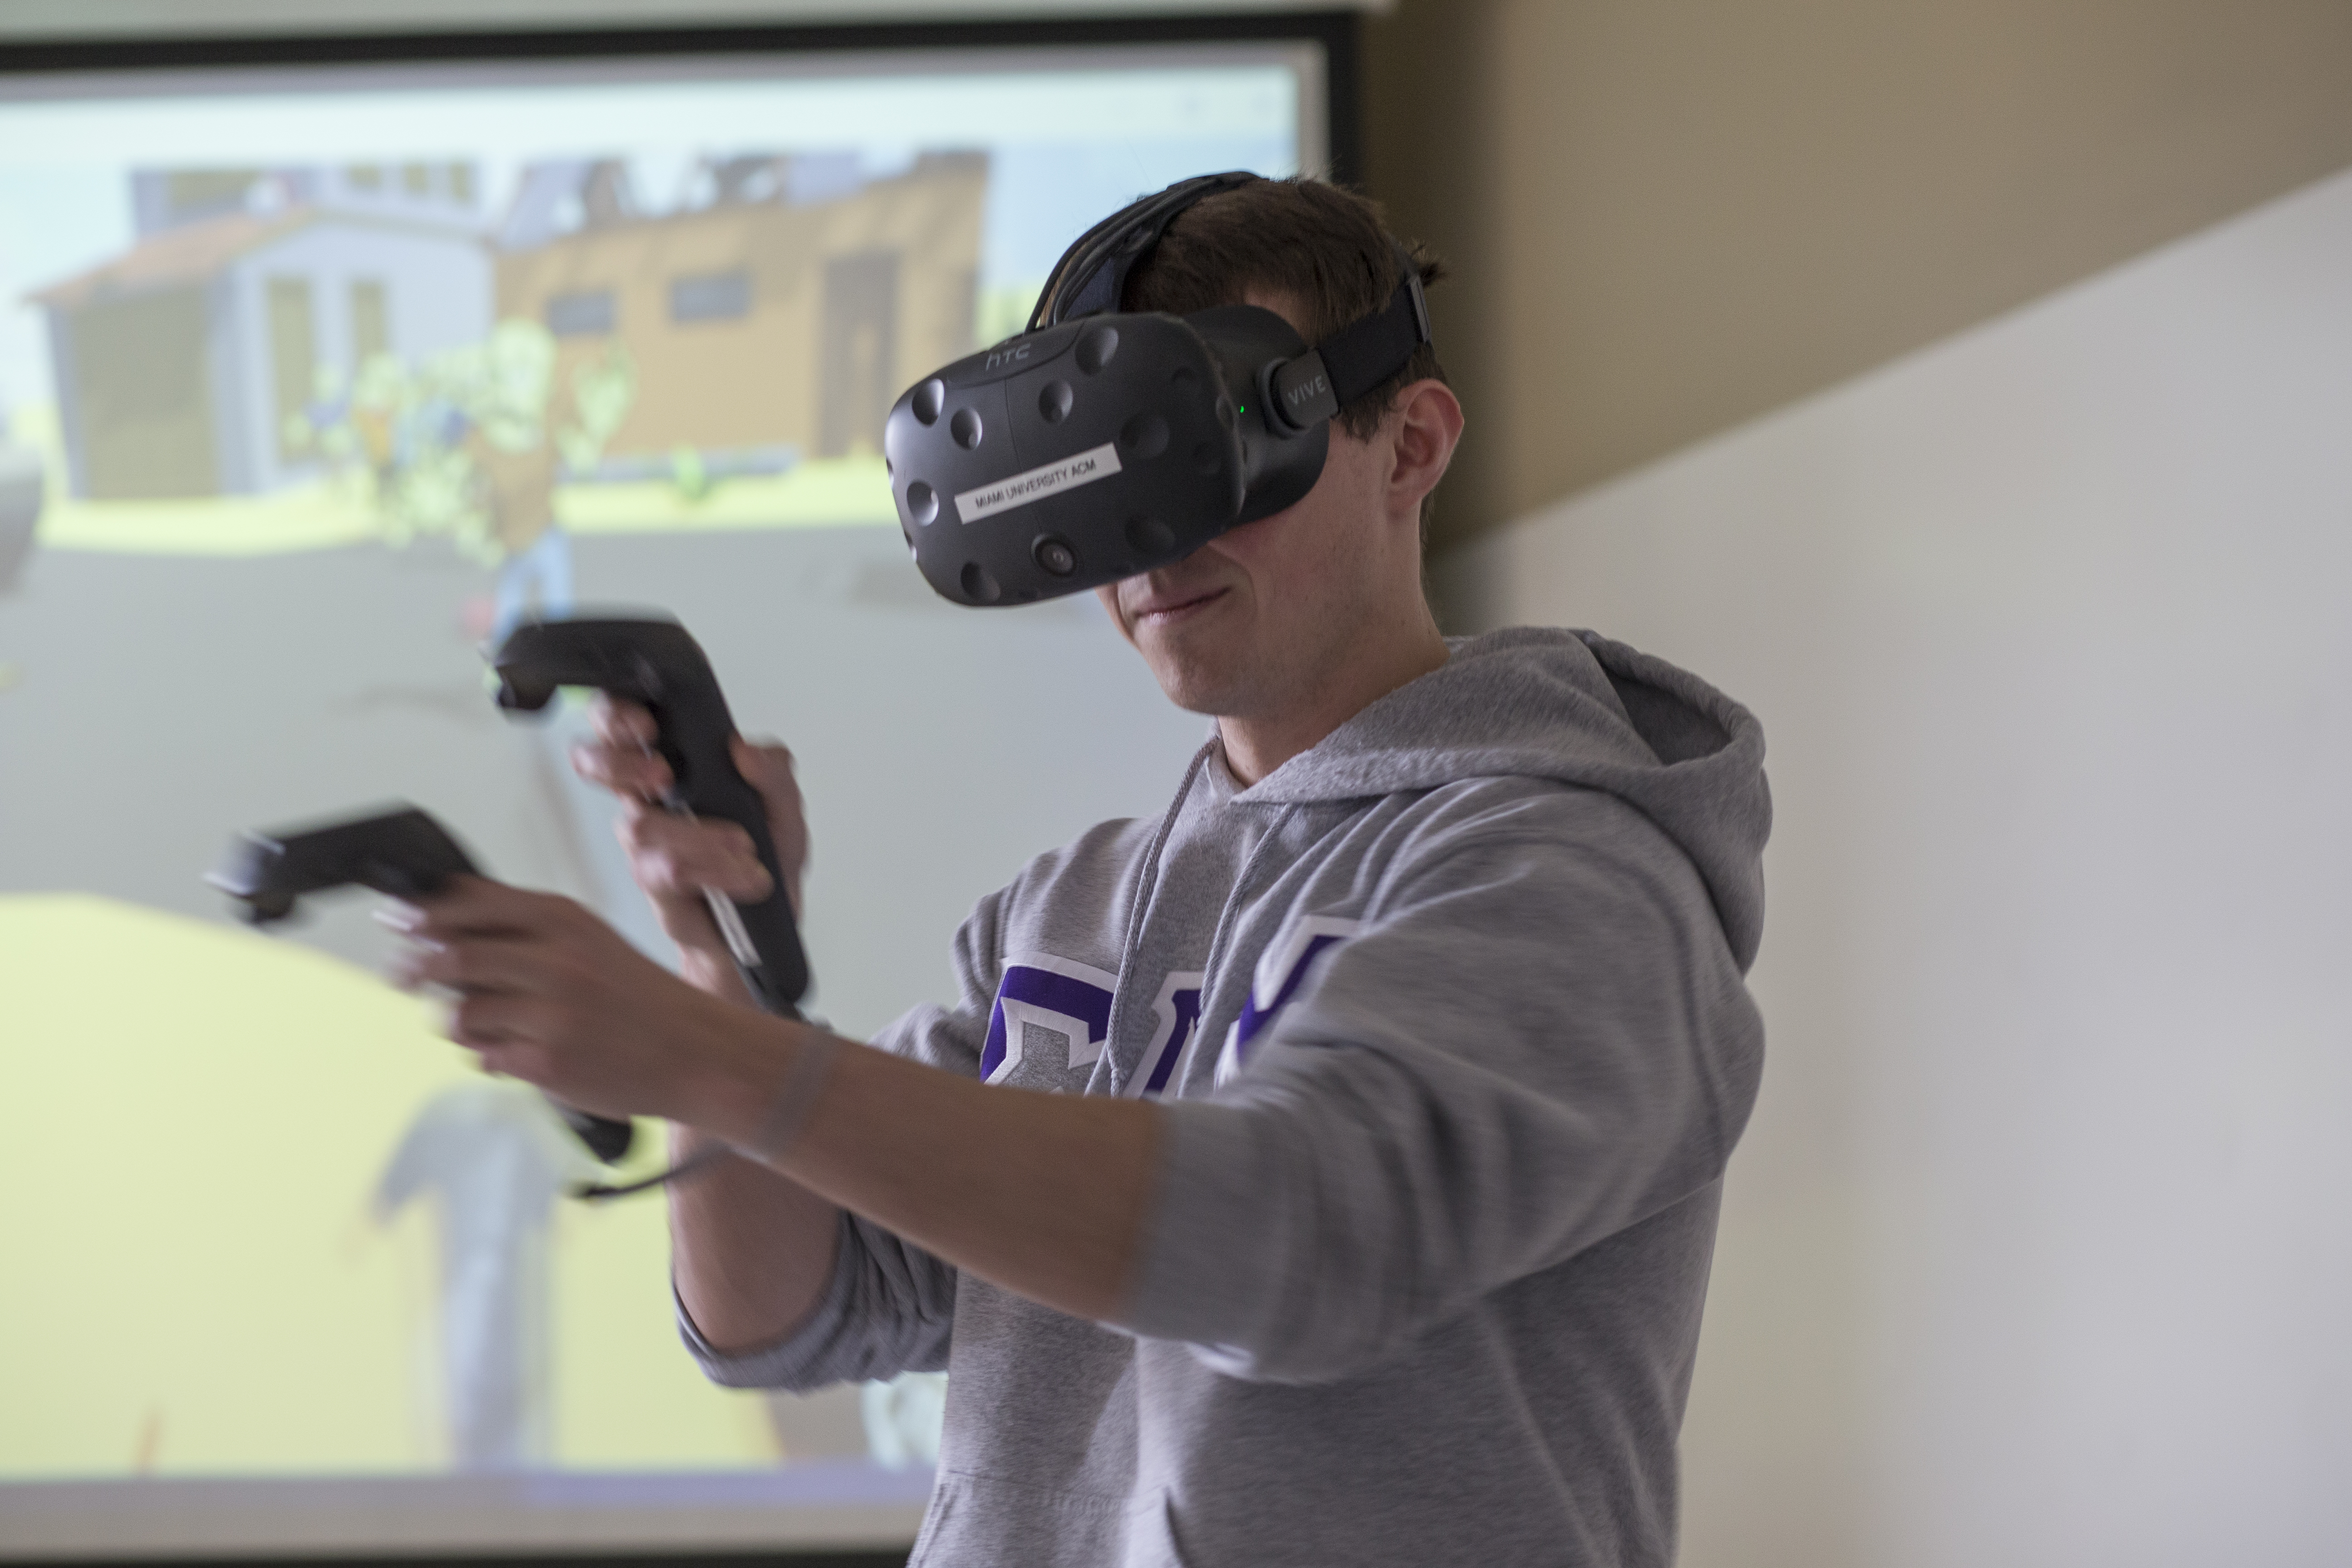 Male student shown using a VR headset and handheld remote